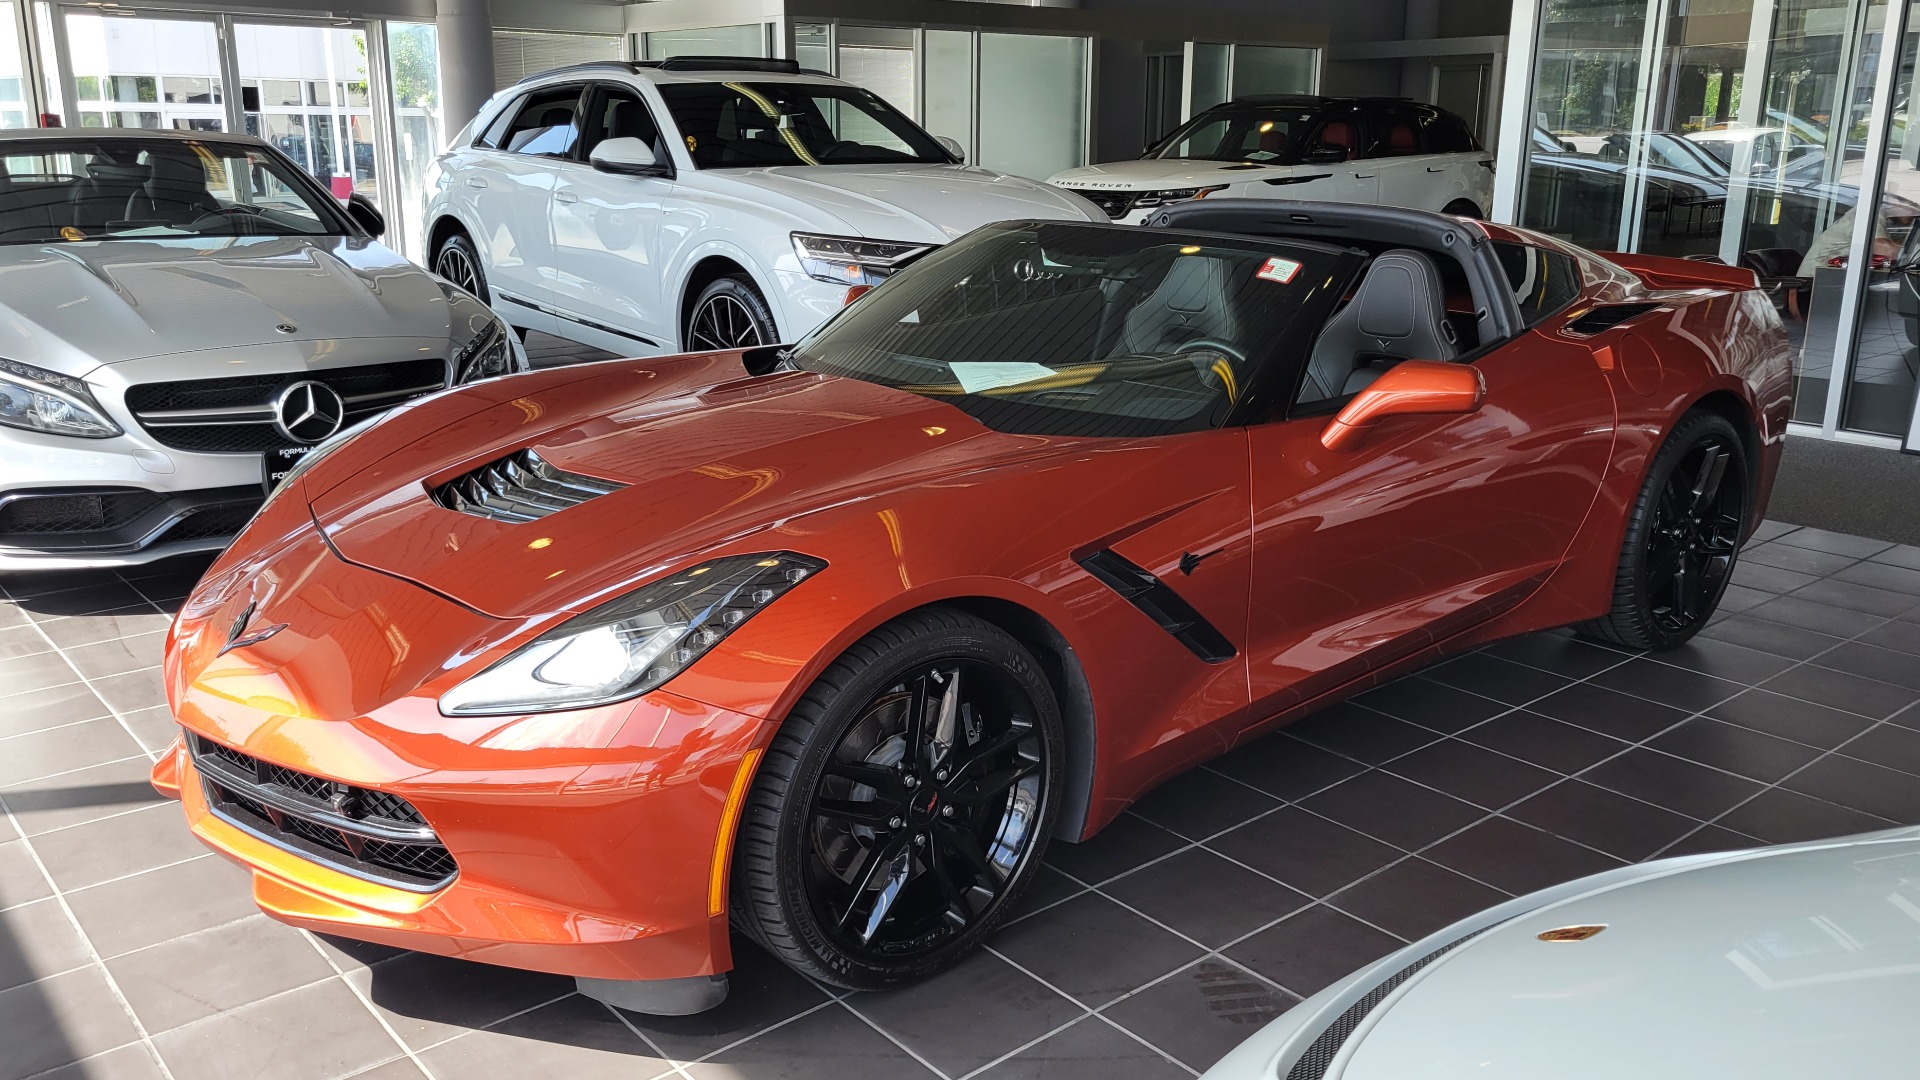 Used 2016 Chevrolet CORVETTE C7 COUPE / Z51 / 2LT / NAV / AUTO / PERF DATA & VIDEO RECORD for sale $56,495 at Formula Imports in Charlotte NC 28227 1